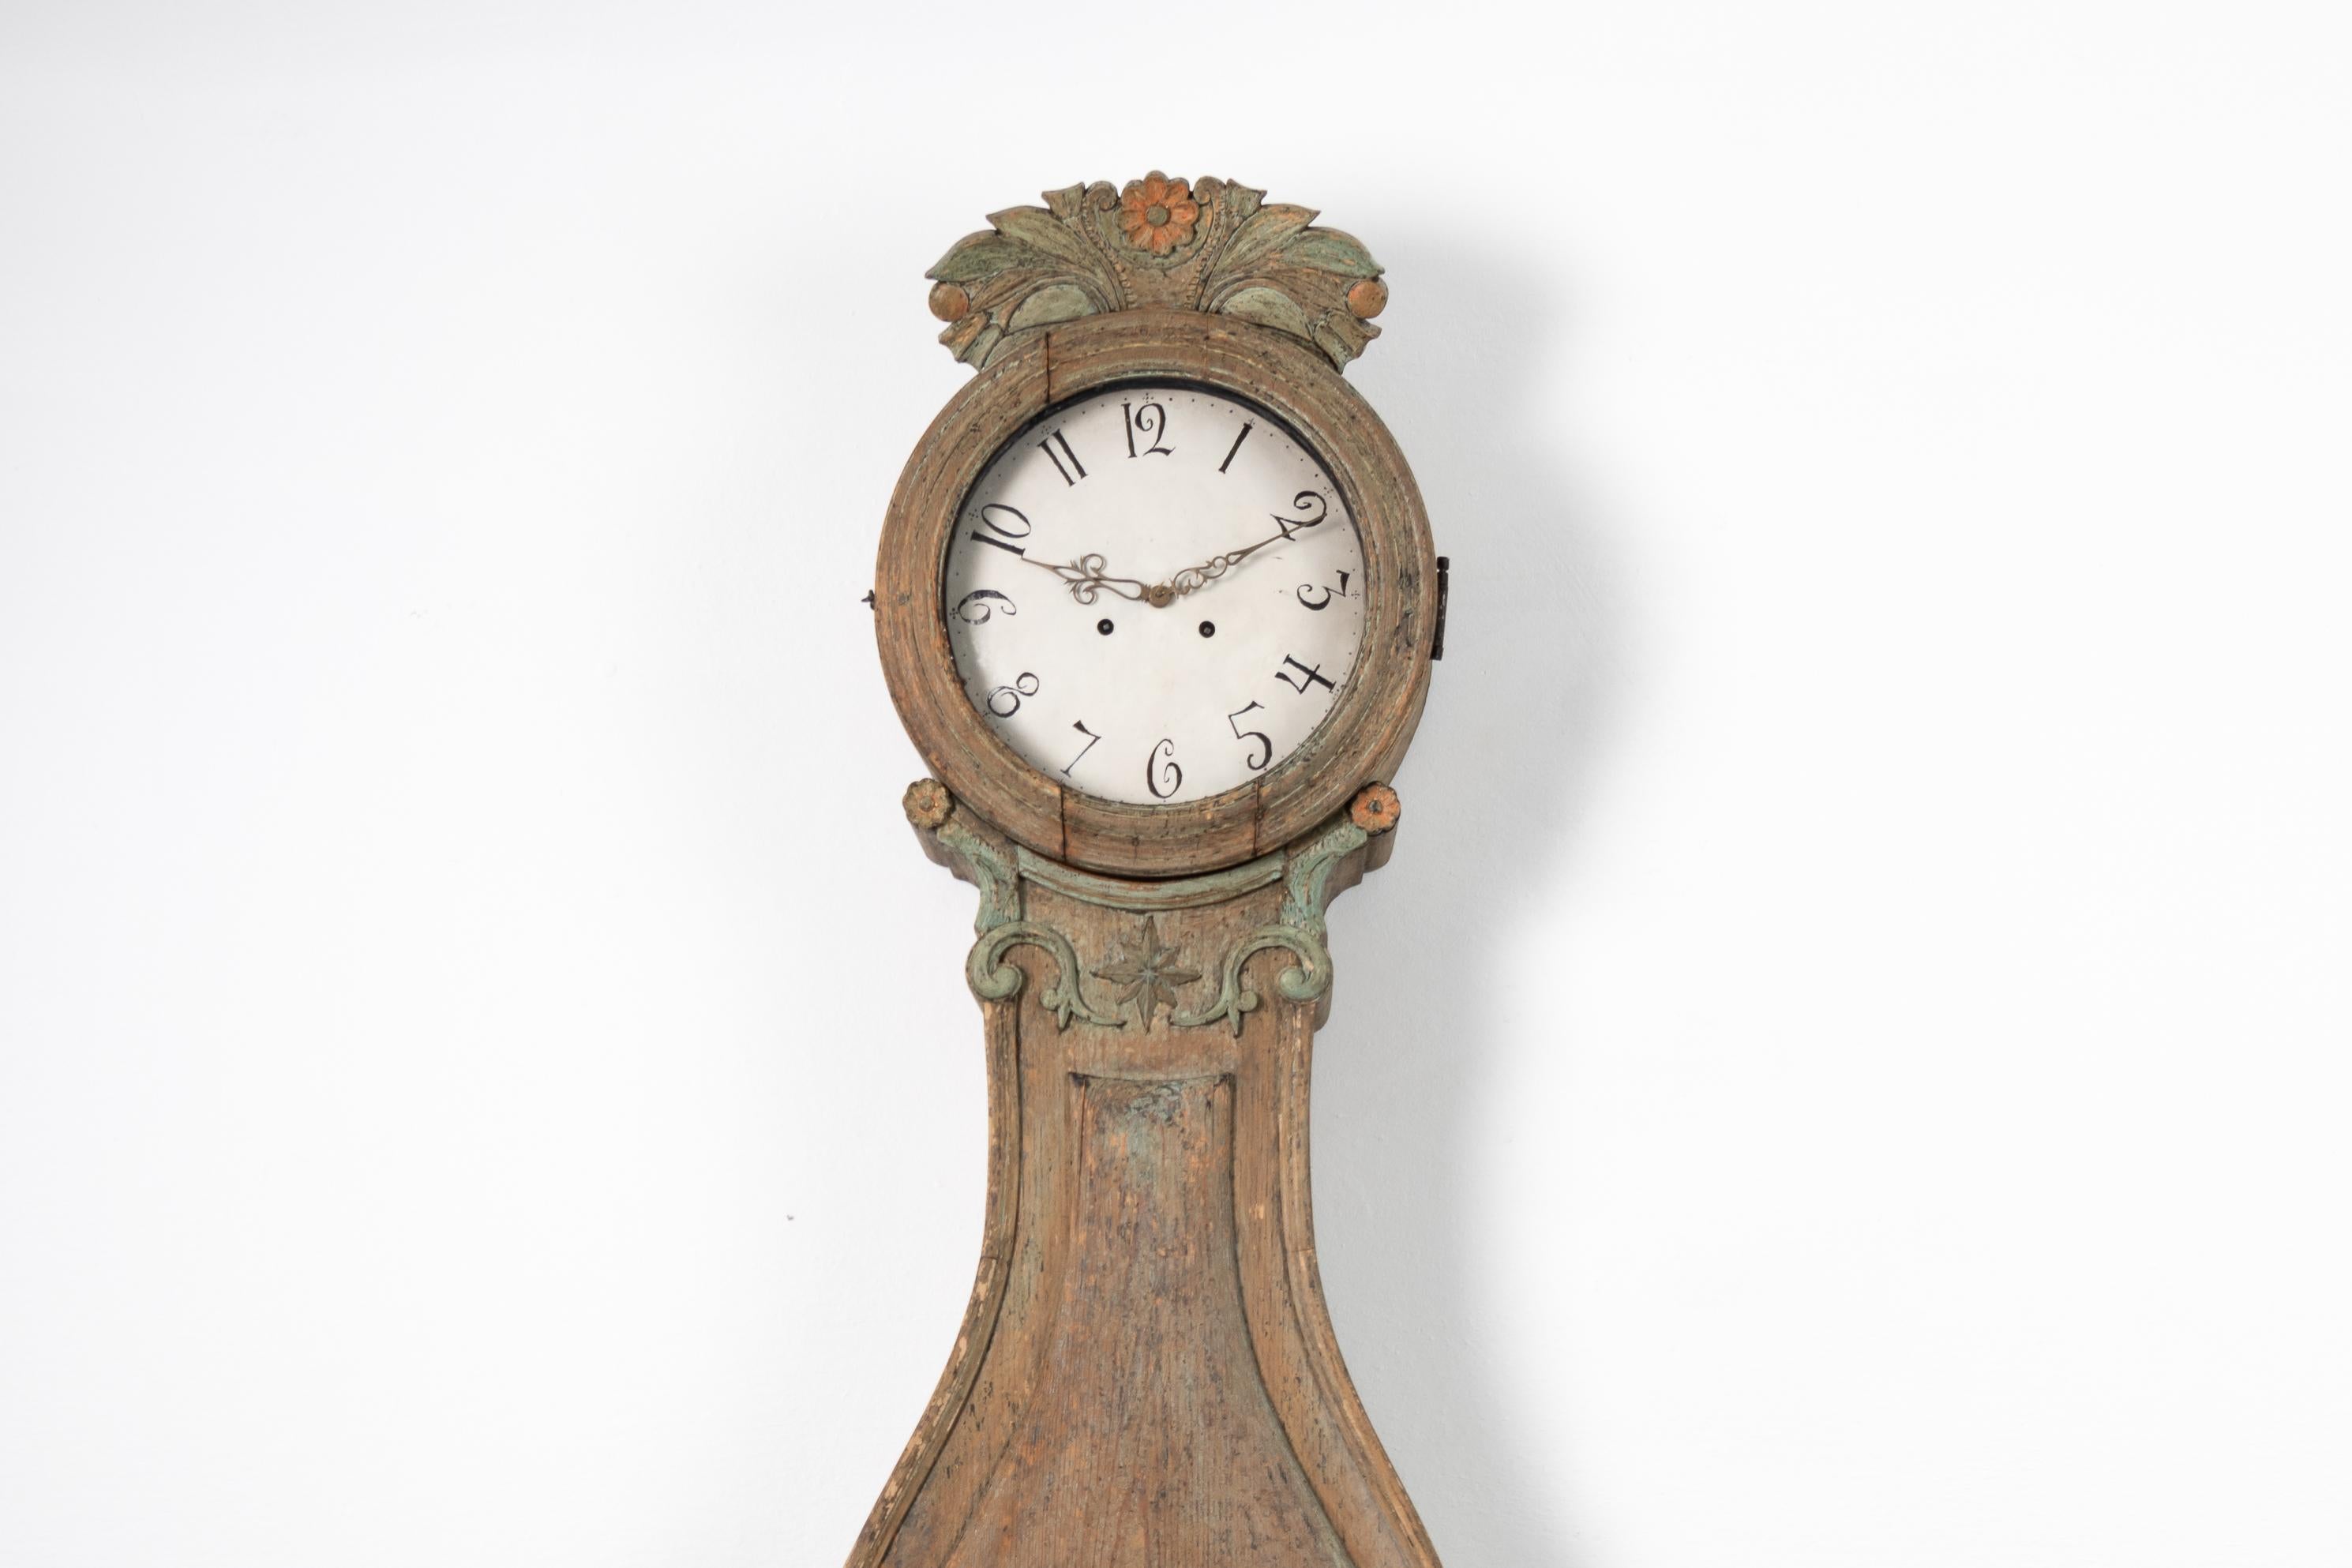 Swedish rococo long case clock made in pine and dry scraped to the original first layer of paint. The clock is a so called Fryksdals clock named after the village Fryksdalen in Värmland where it’s originally from. Made between 1810 and 1820 in the